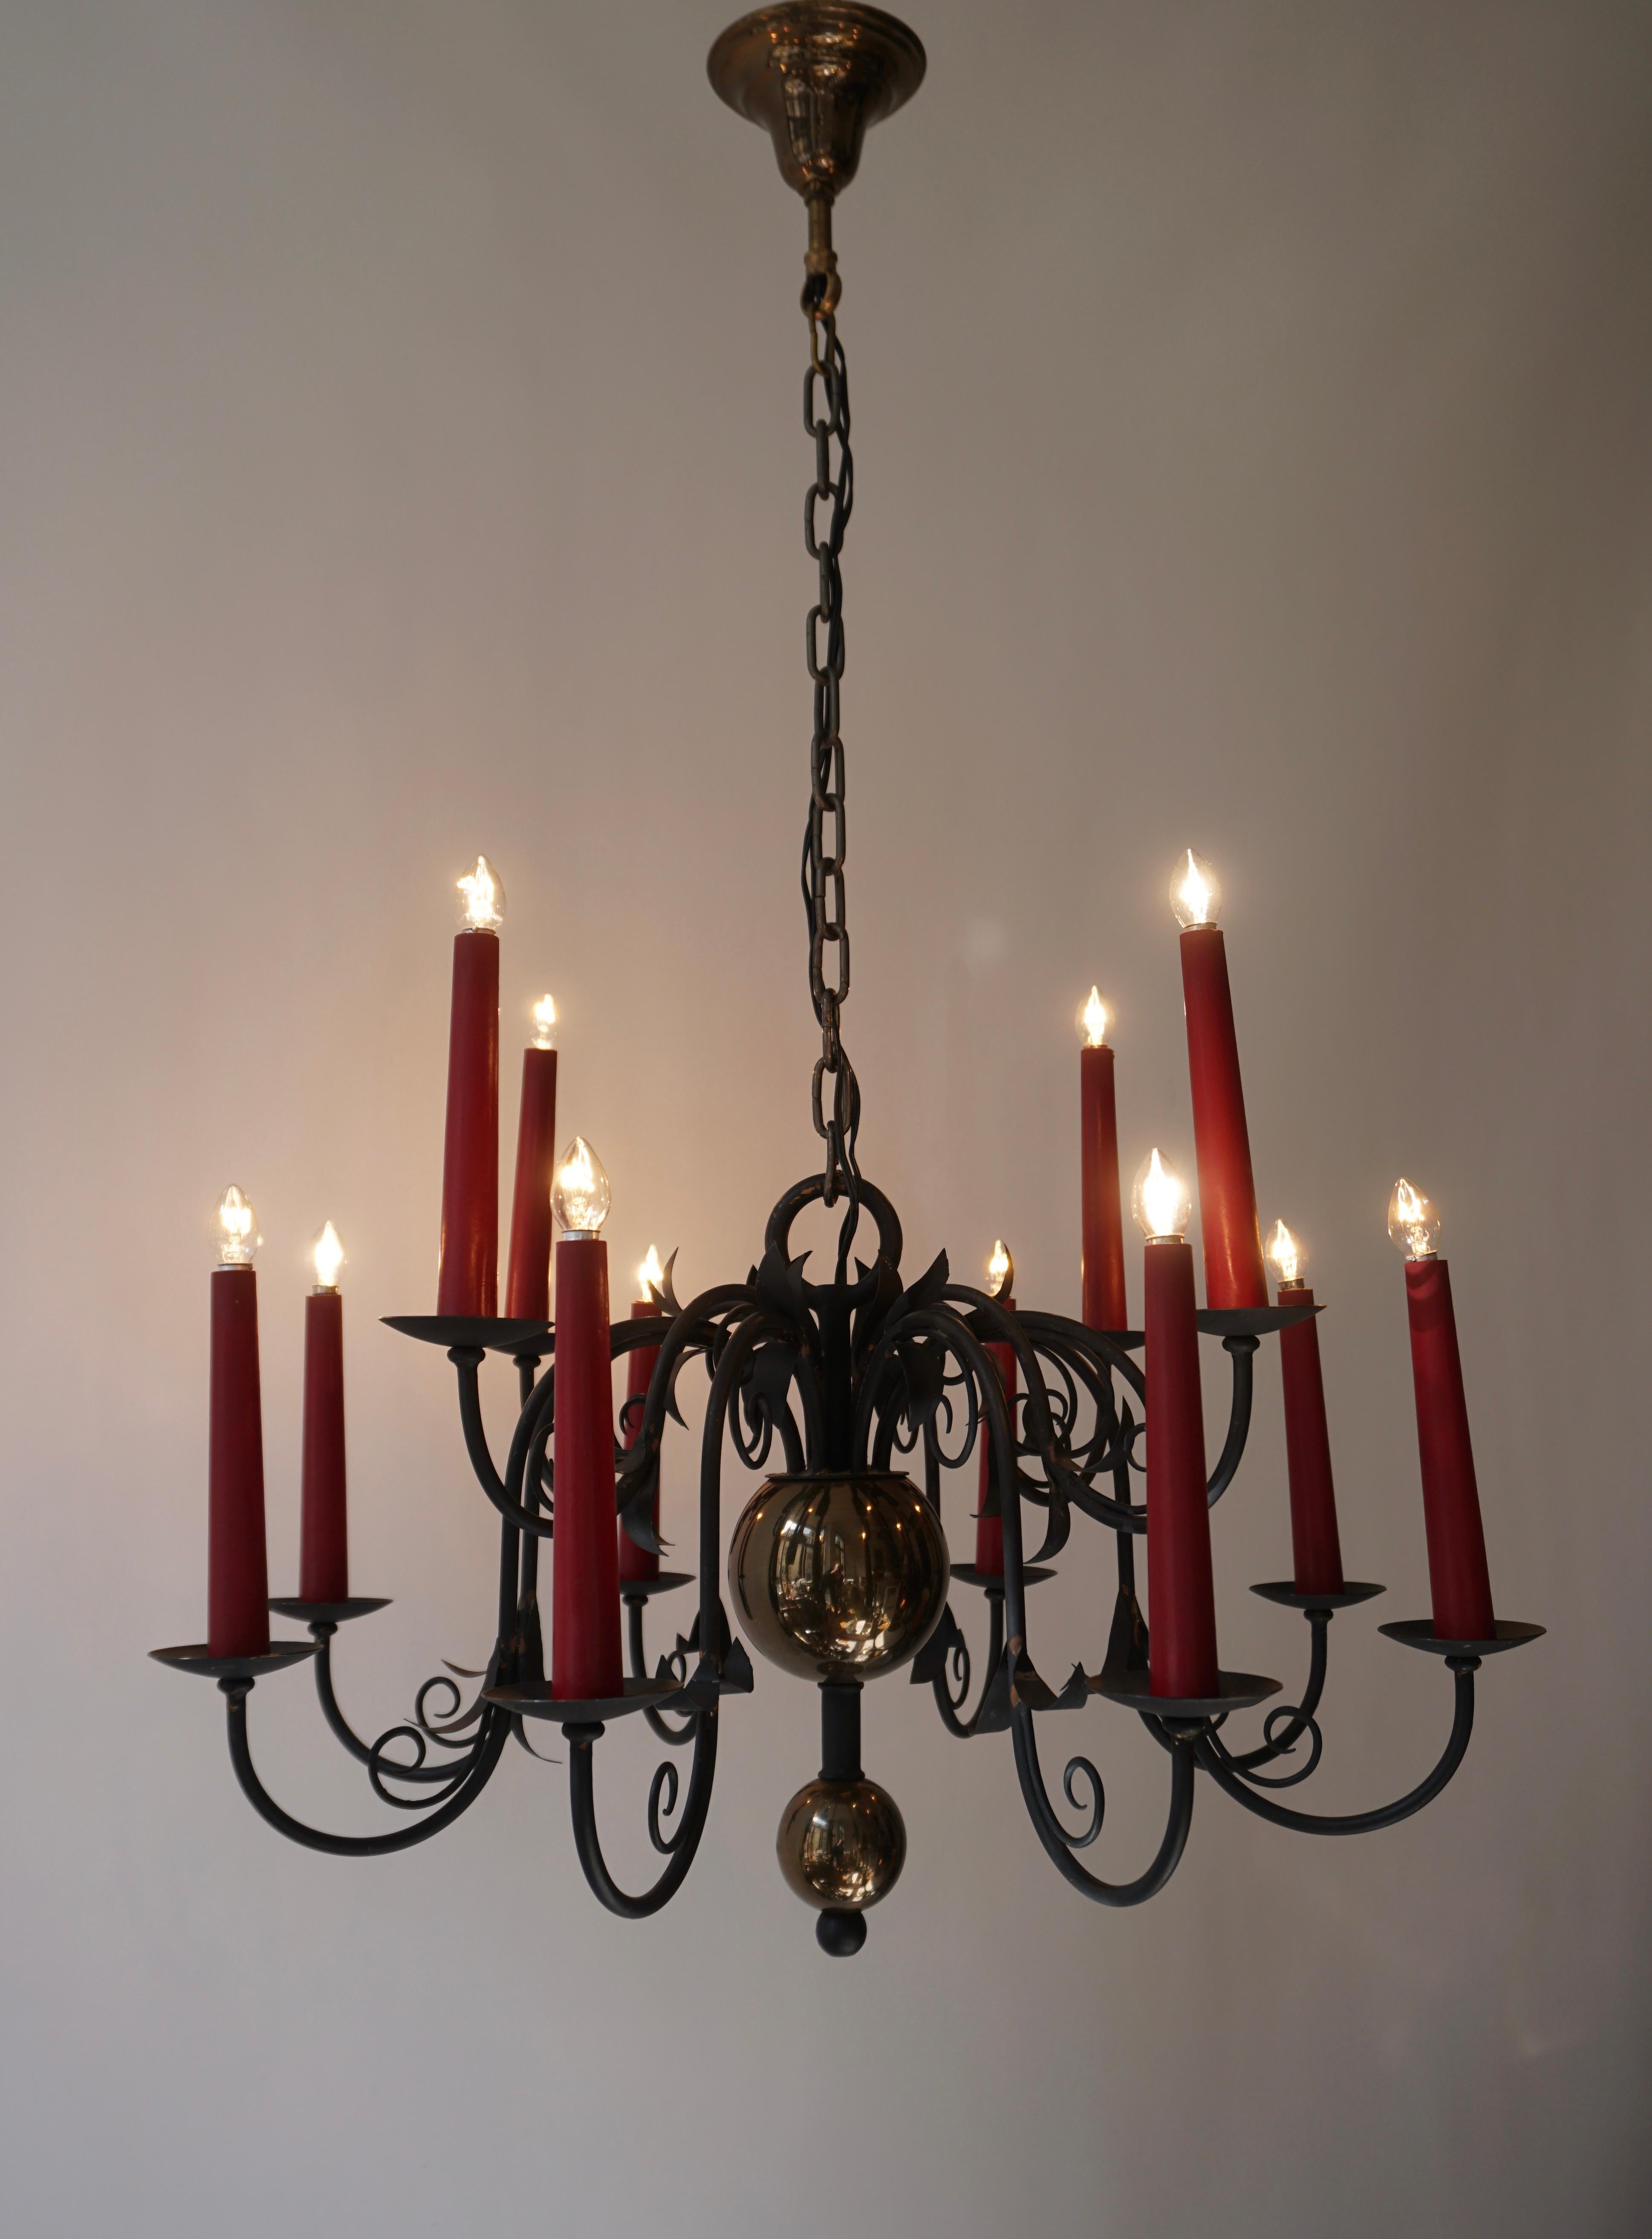 1950s Black Wrought Iron Gothic Chandelier with 12 Red Candlesticks 11